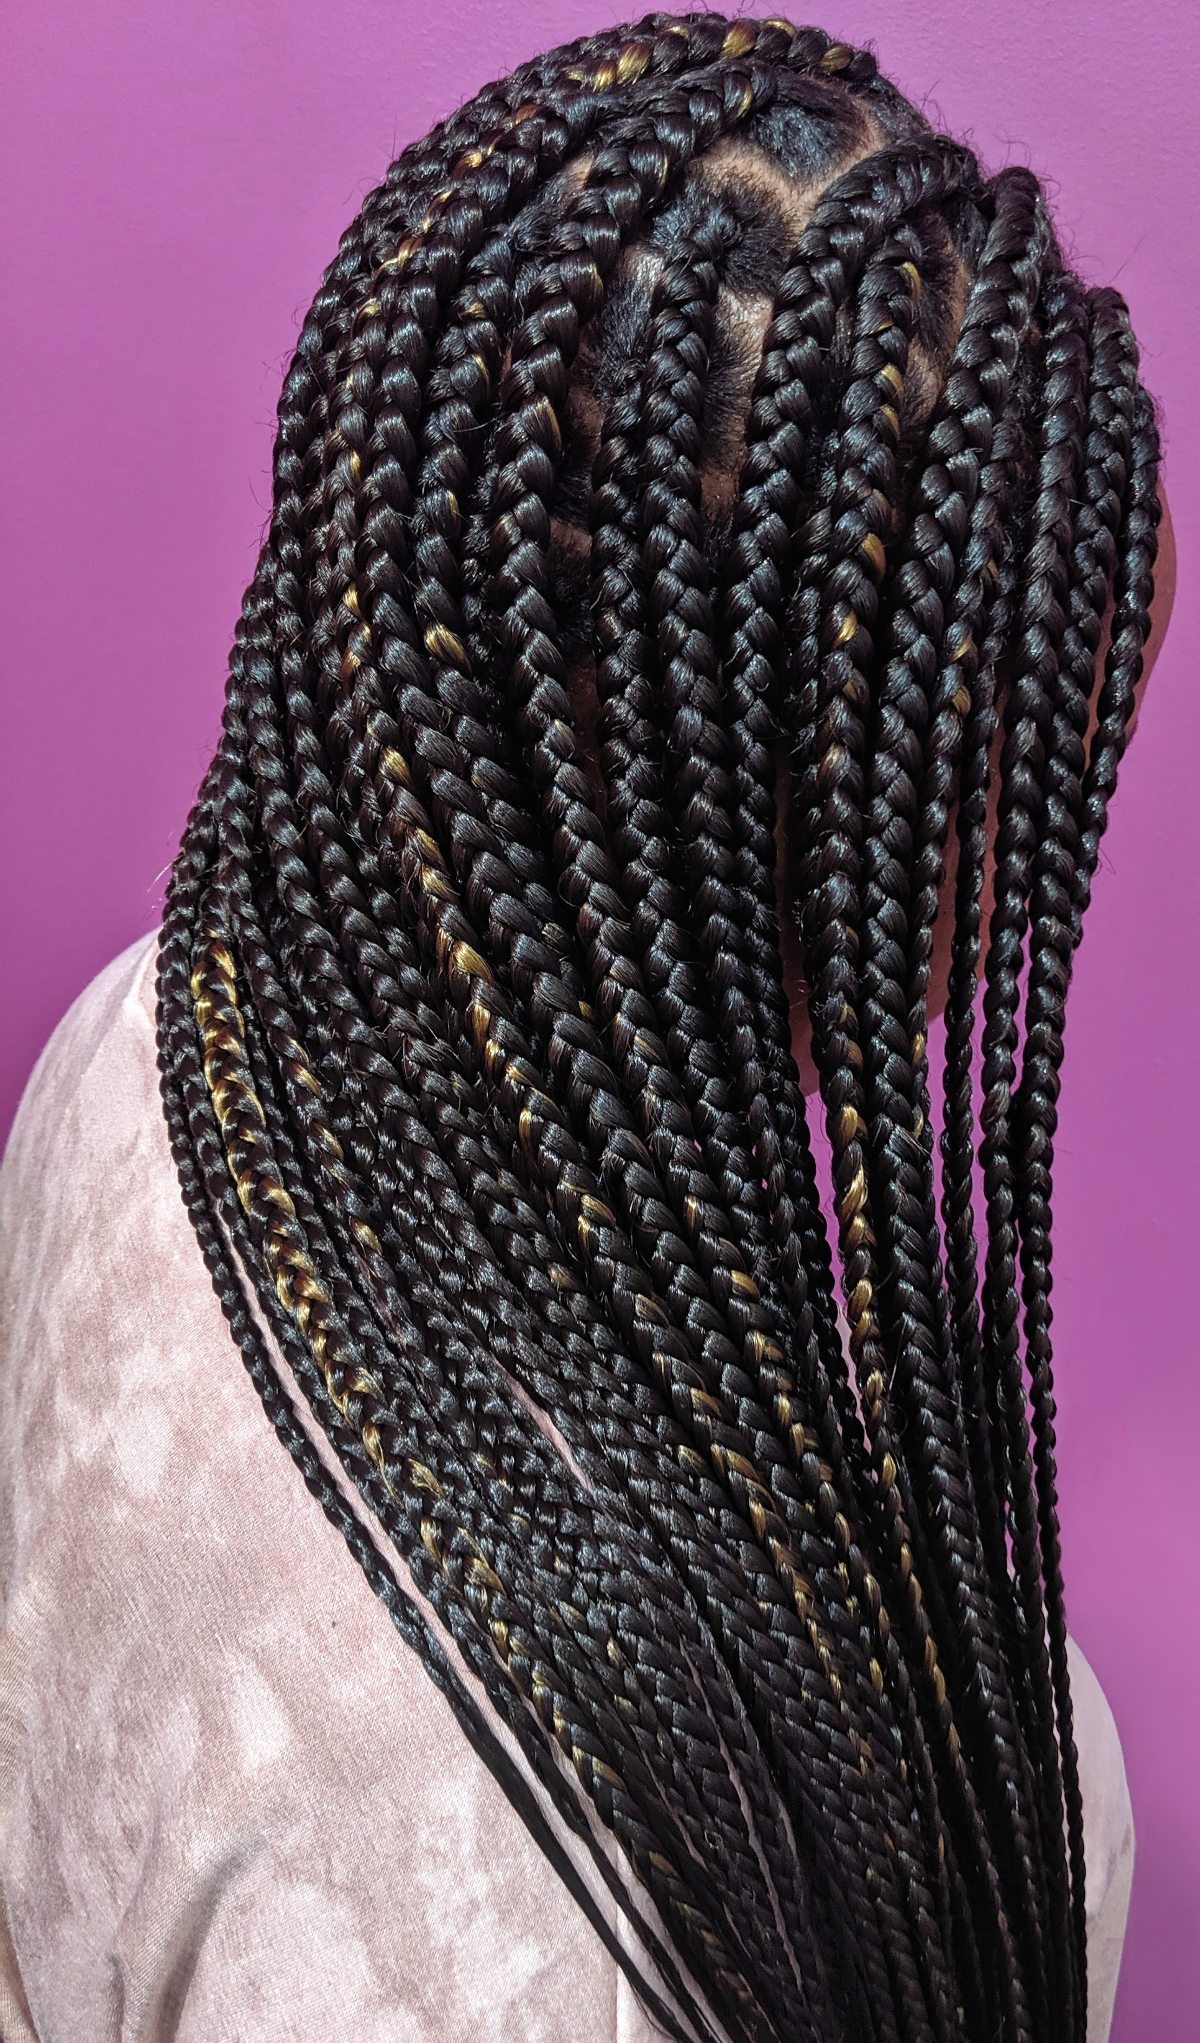 11 Hairstyles for Black Women With Braids - Woman's World